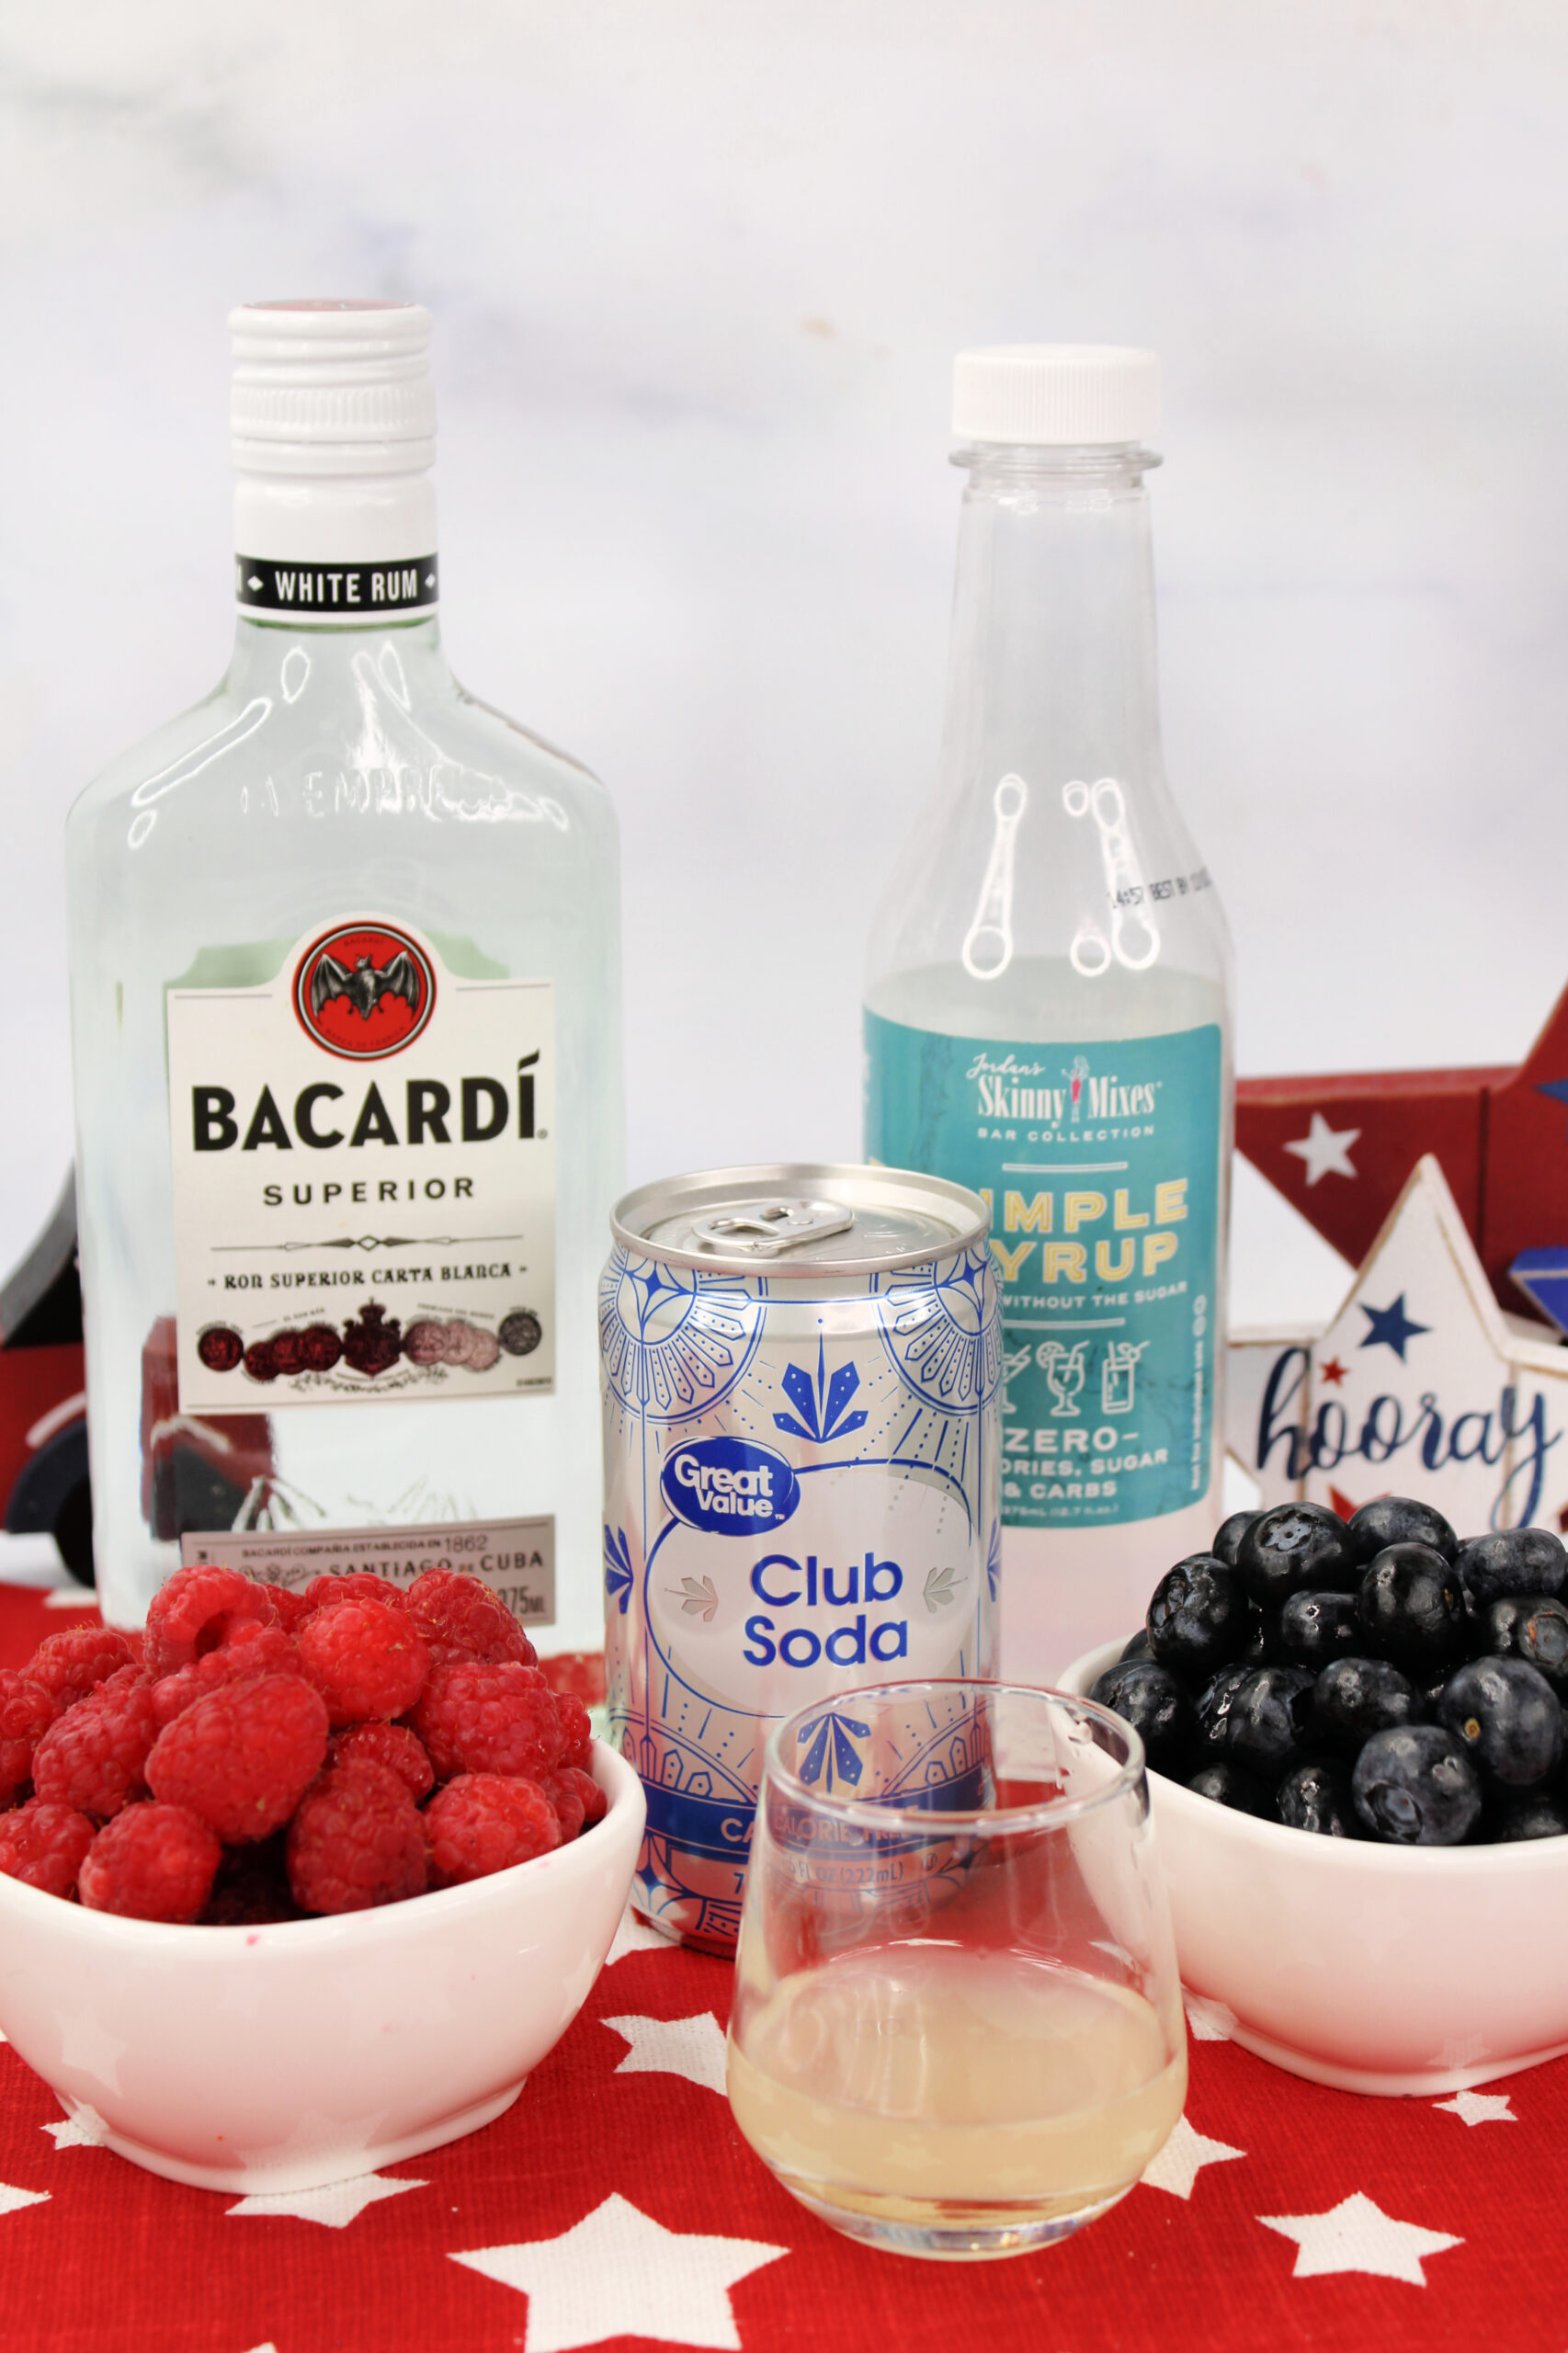 Ingredients for a Fourth of July Mojito include raspberries, blueberries, rum, simple syrup and club soda. These ingredients are sitting on a pretty red cloth napkin with white stars.